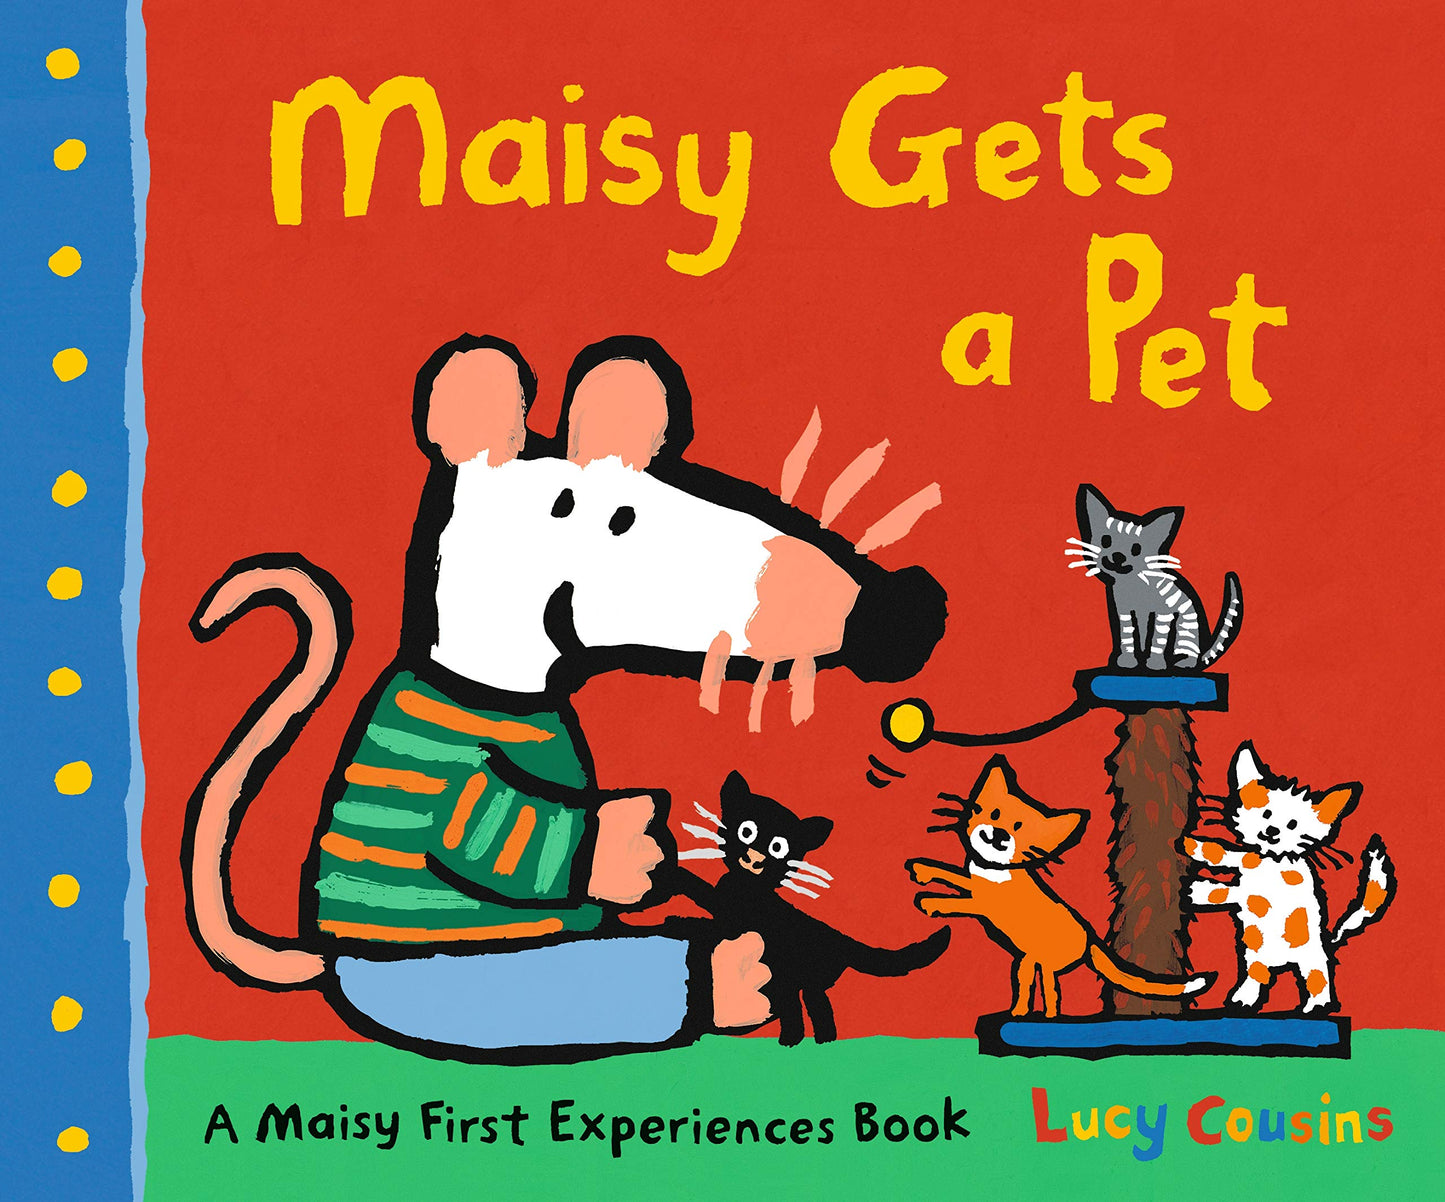 Maisy Gets a Pet - A Maisy First Experiences Book by Lucy Cousins